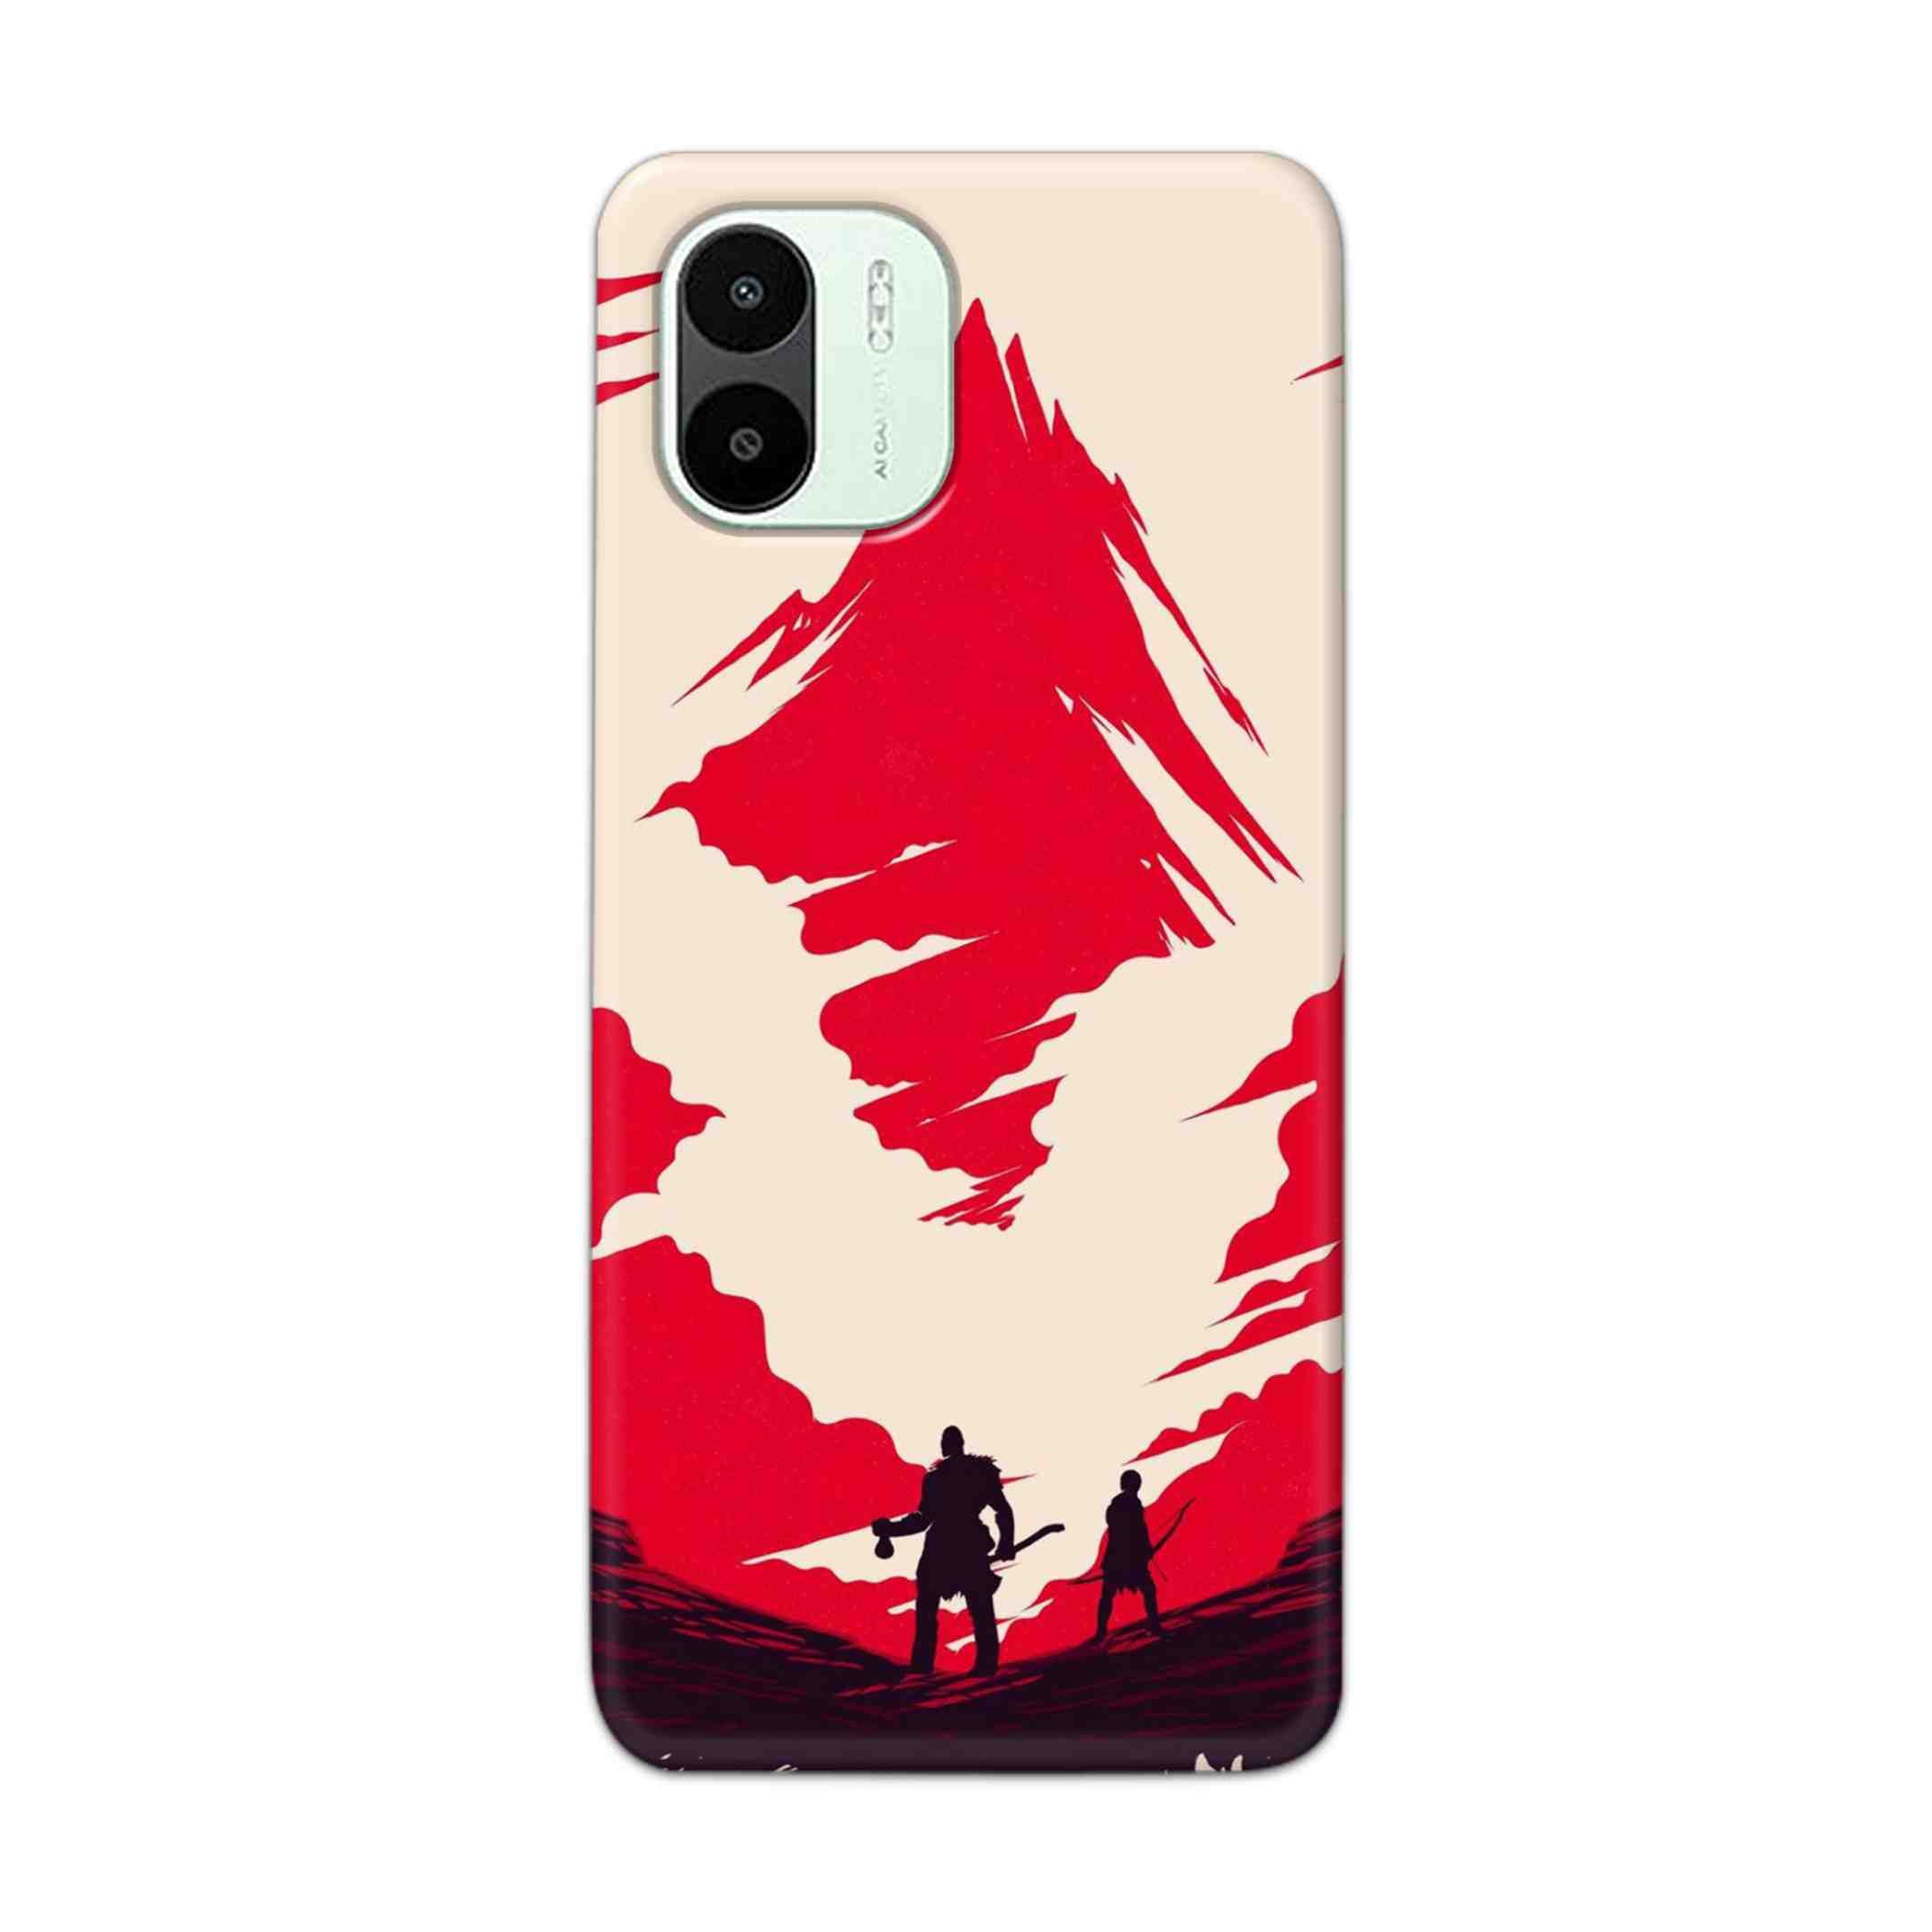 Buy God Of War Art Hard Back Mobile Phone Case Cover For Xiaomi Redmi A1 5G Online